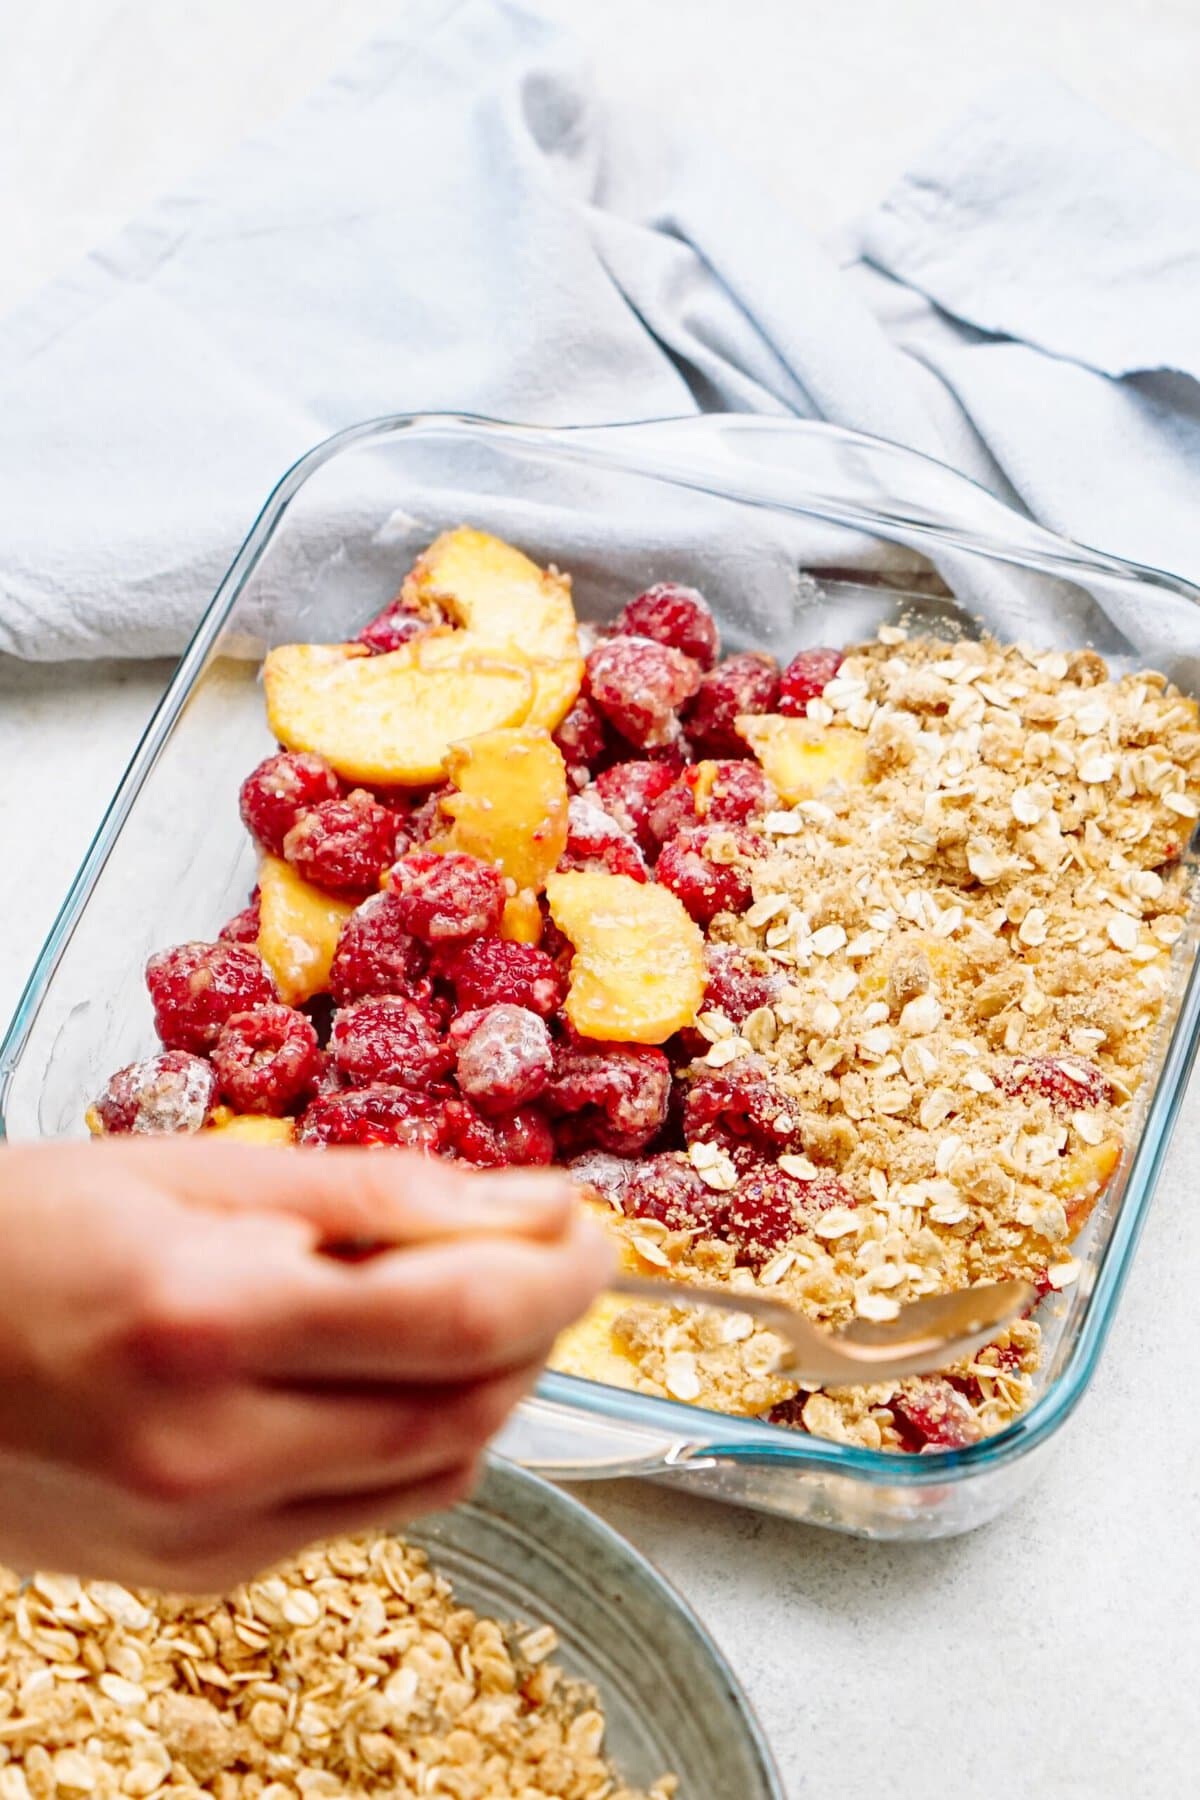 A hand is sprinkling oat crumble over a mixture of frozen raspberries and peach slices in a glass baking dish, preparing a delightful raspberry cobbler. A light blue cloth lies softly in the background.